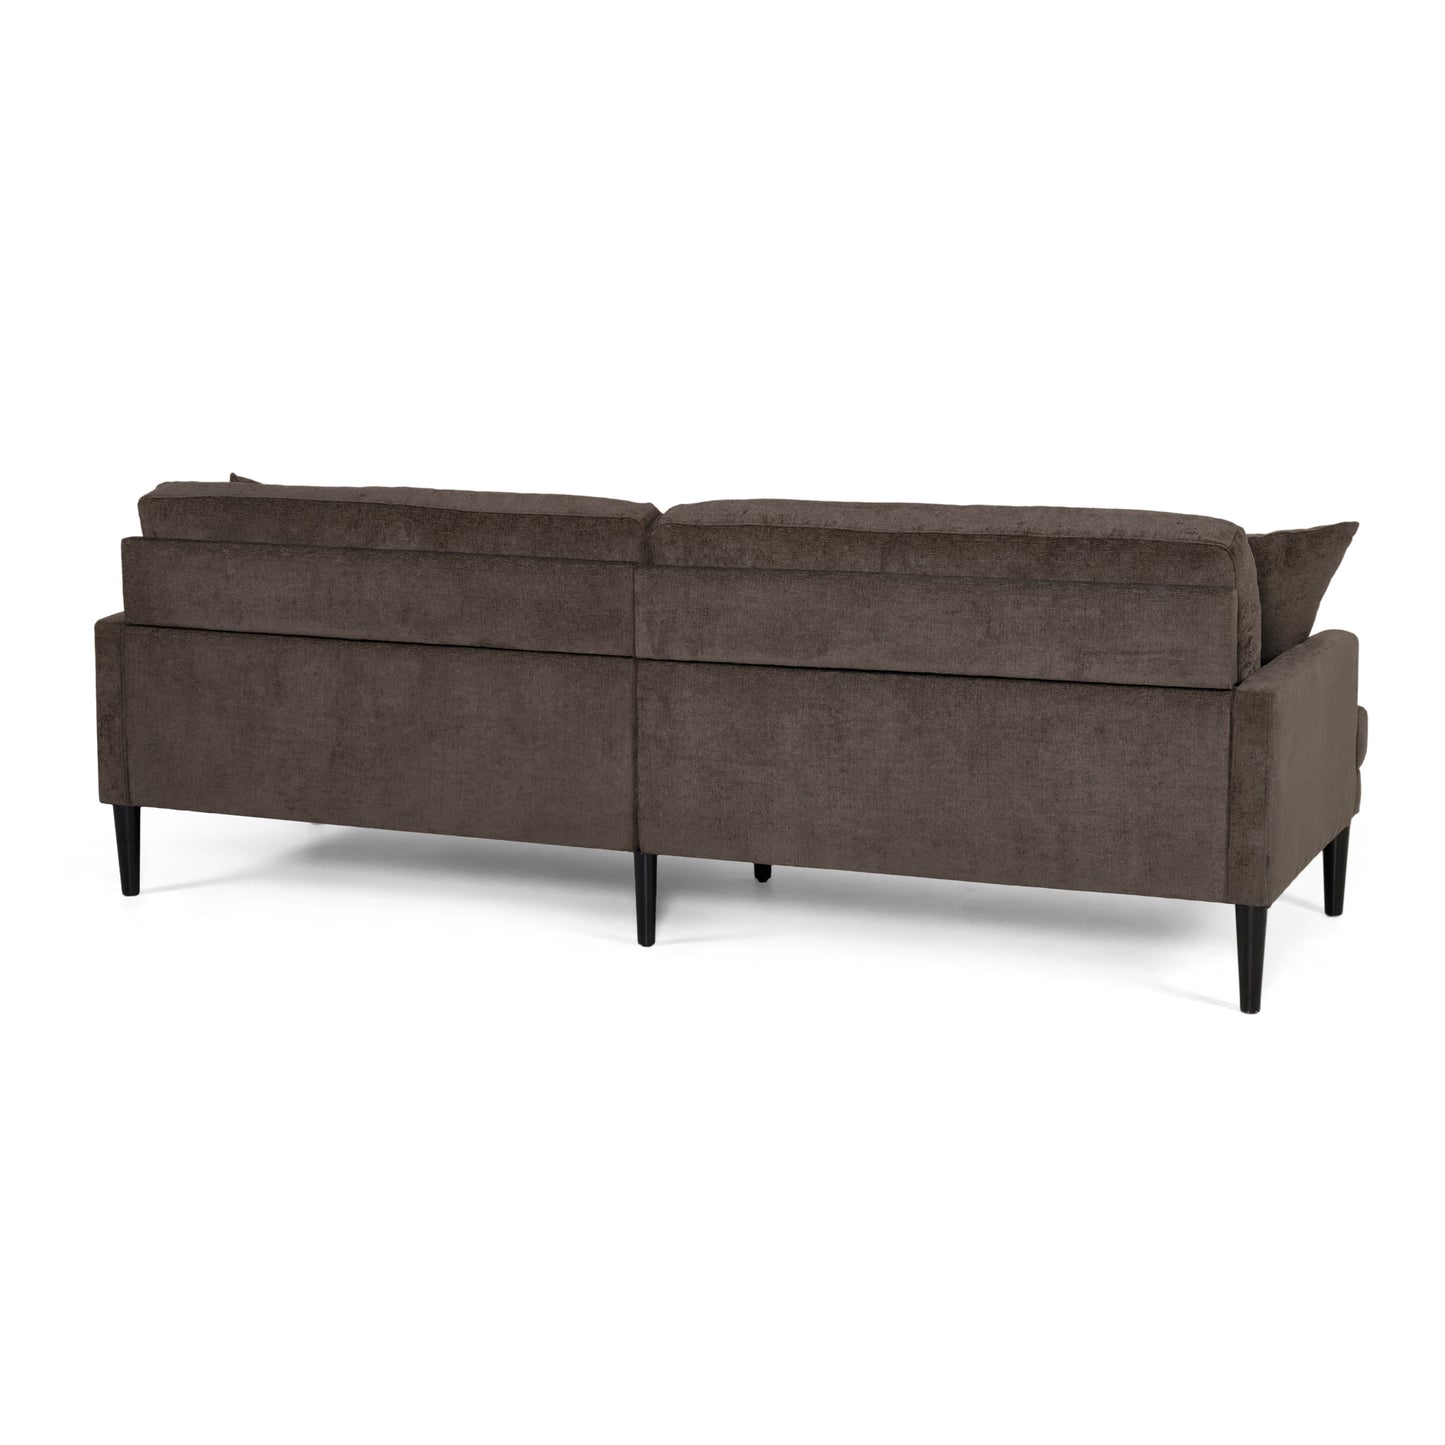 Adut Contemporary 3 Seater Fabric Sofa with Accent Pillows